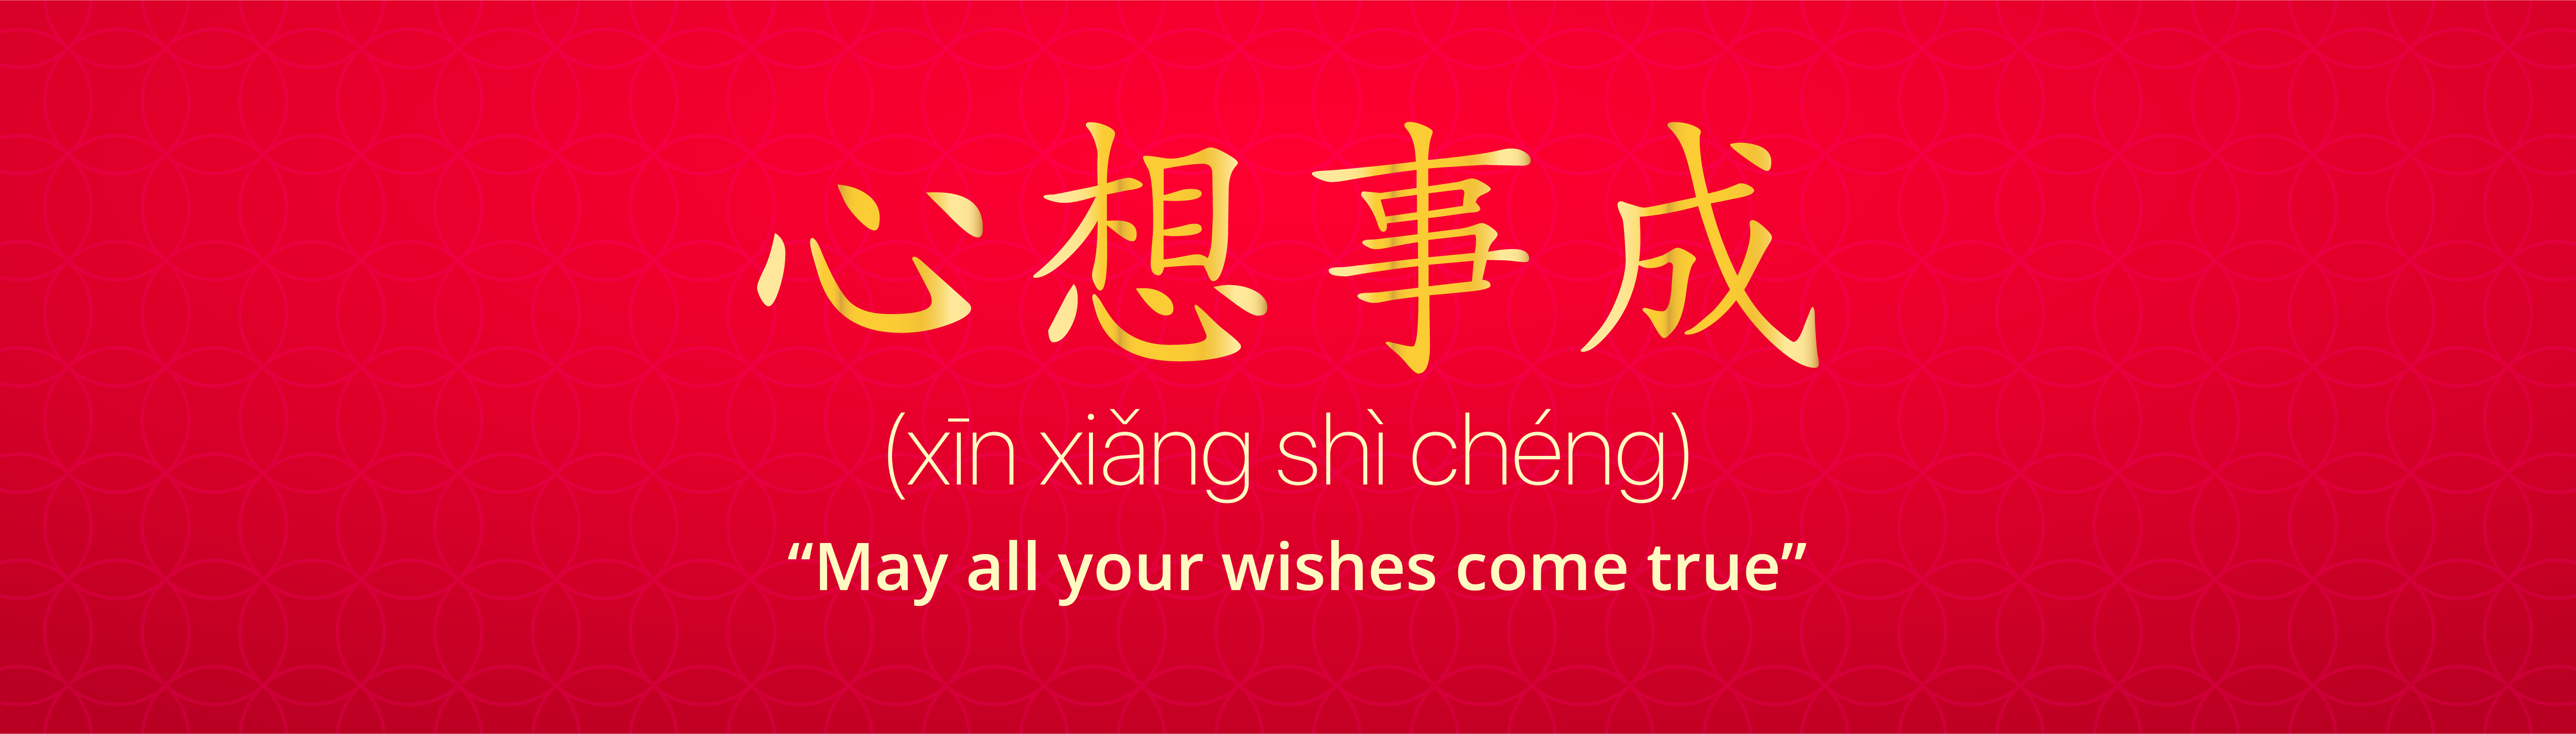 Xin Xiang Shi Cheng(心想事成): “May all your wishes come true”